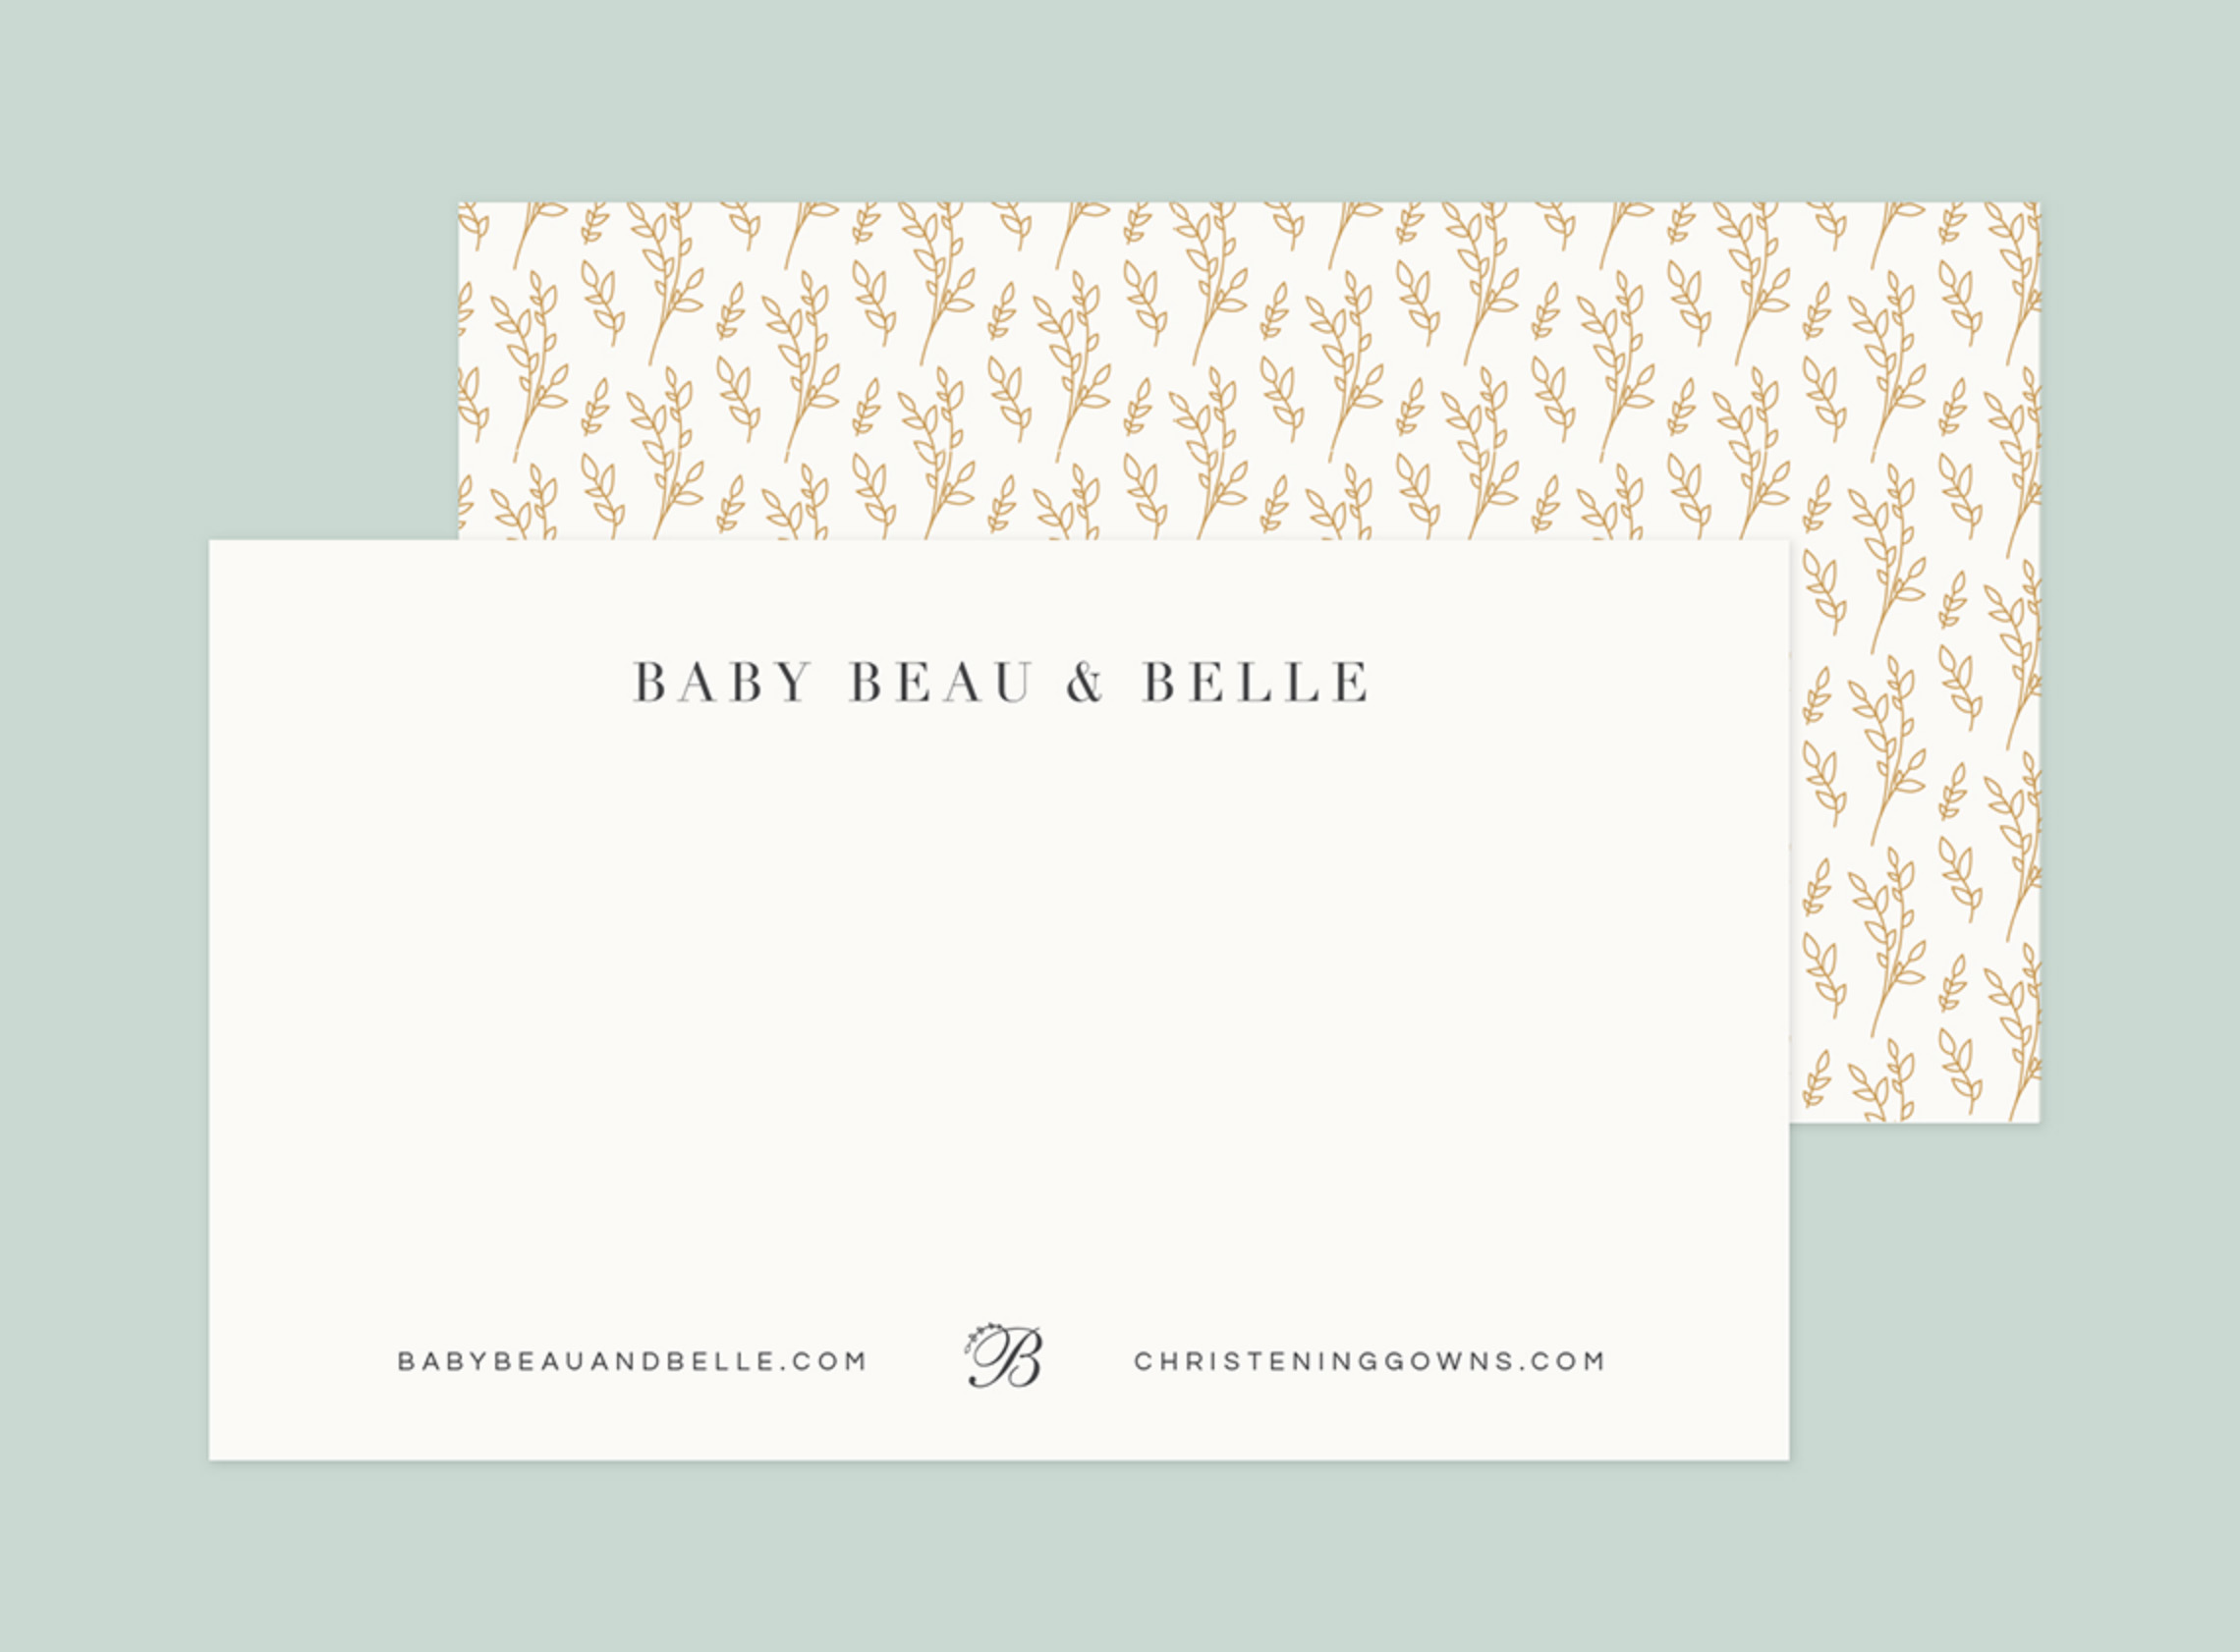 Branded cart insert design for handmade baby clothes company.